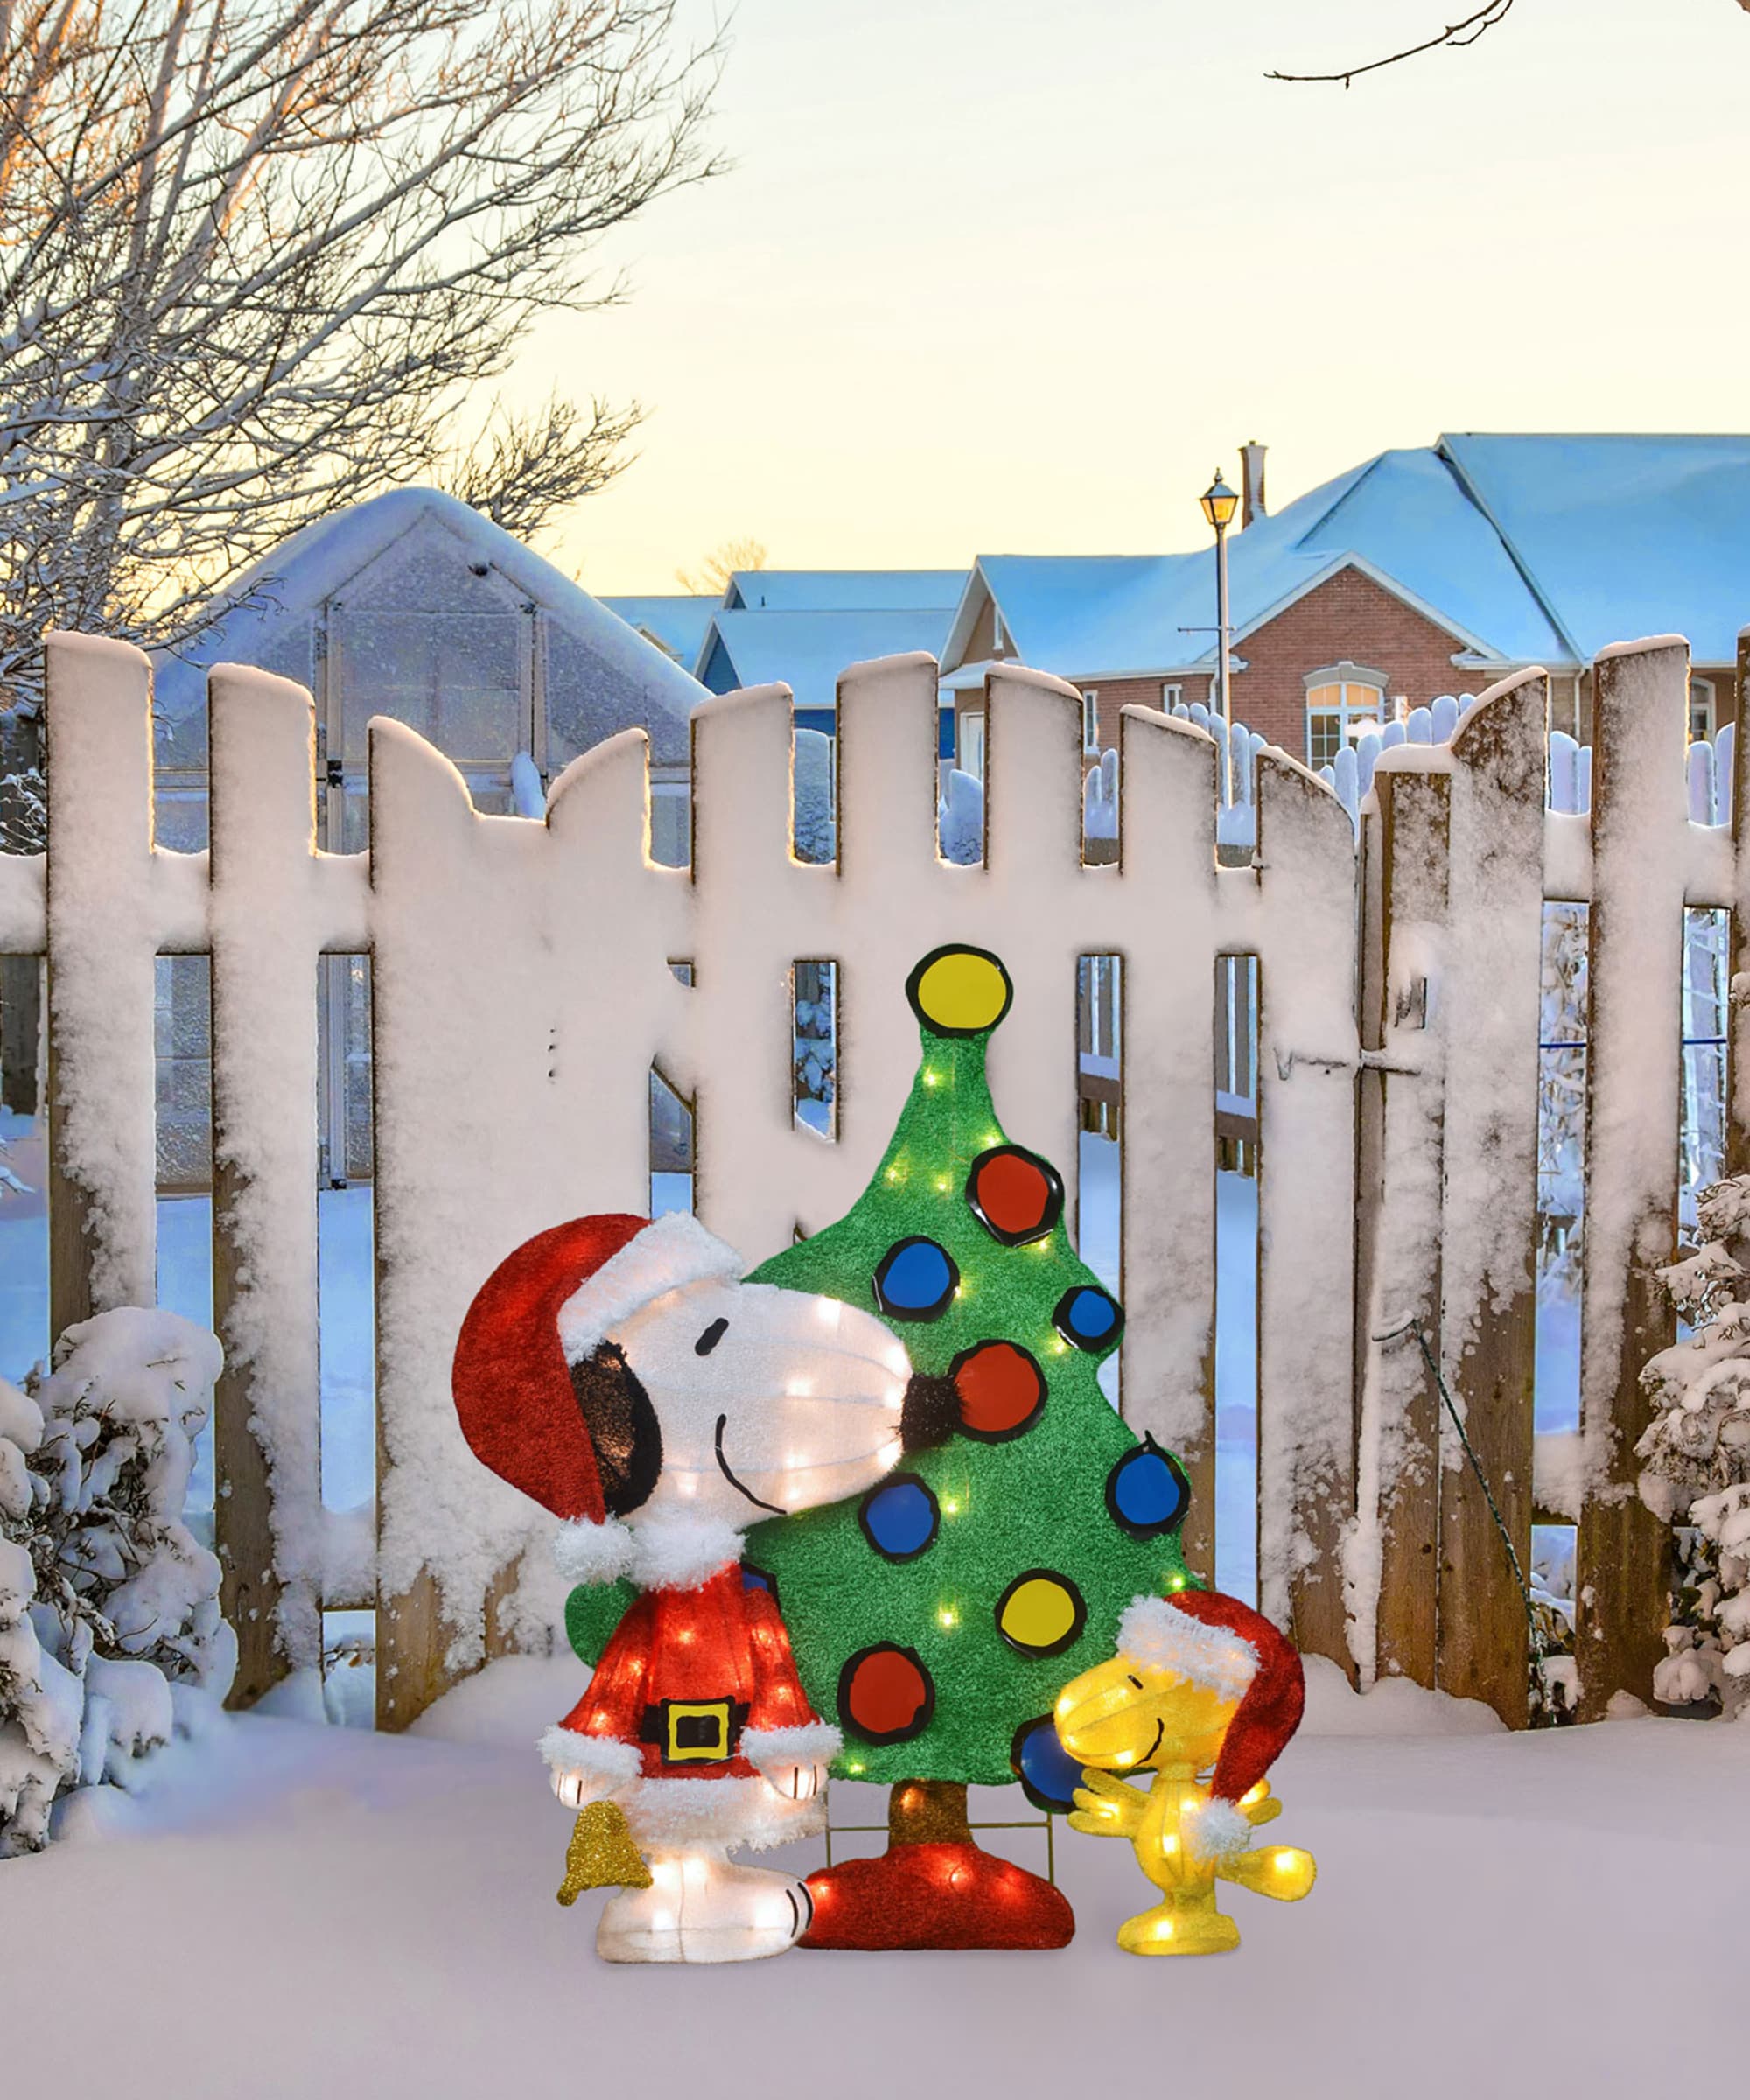 ProductWorks 10322 18 Pre-Lit Peanuts Soft Tinsel Santa Claus Snoopy Christmas Yard Art Decoration-Clear Lights